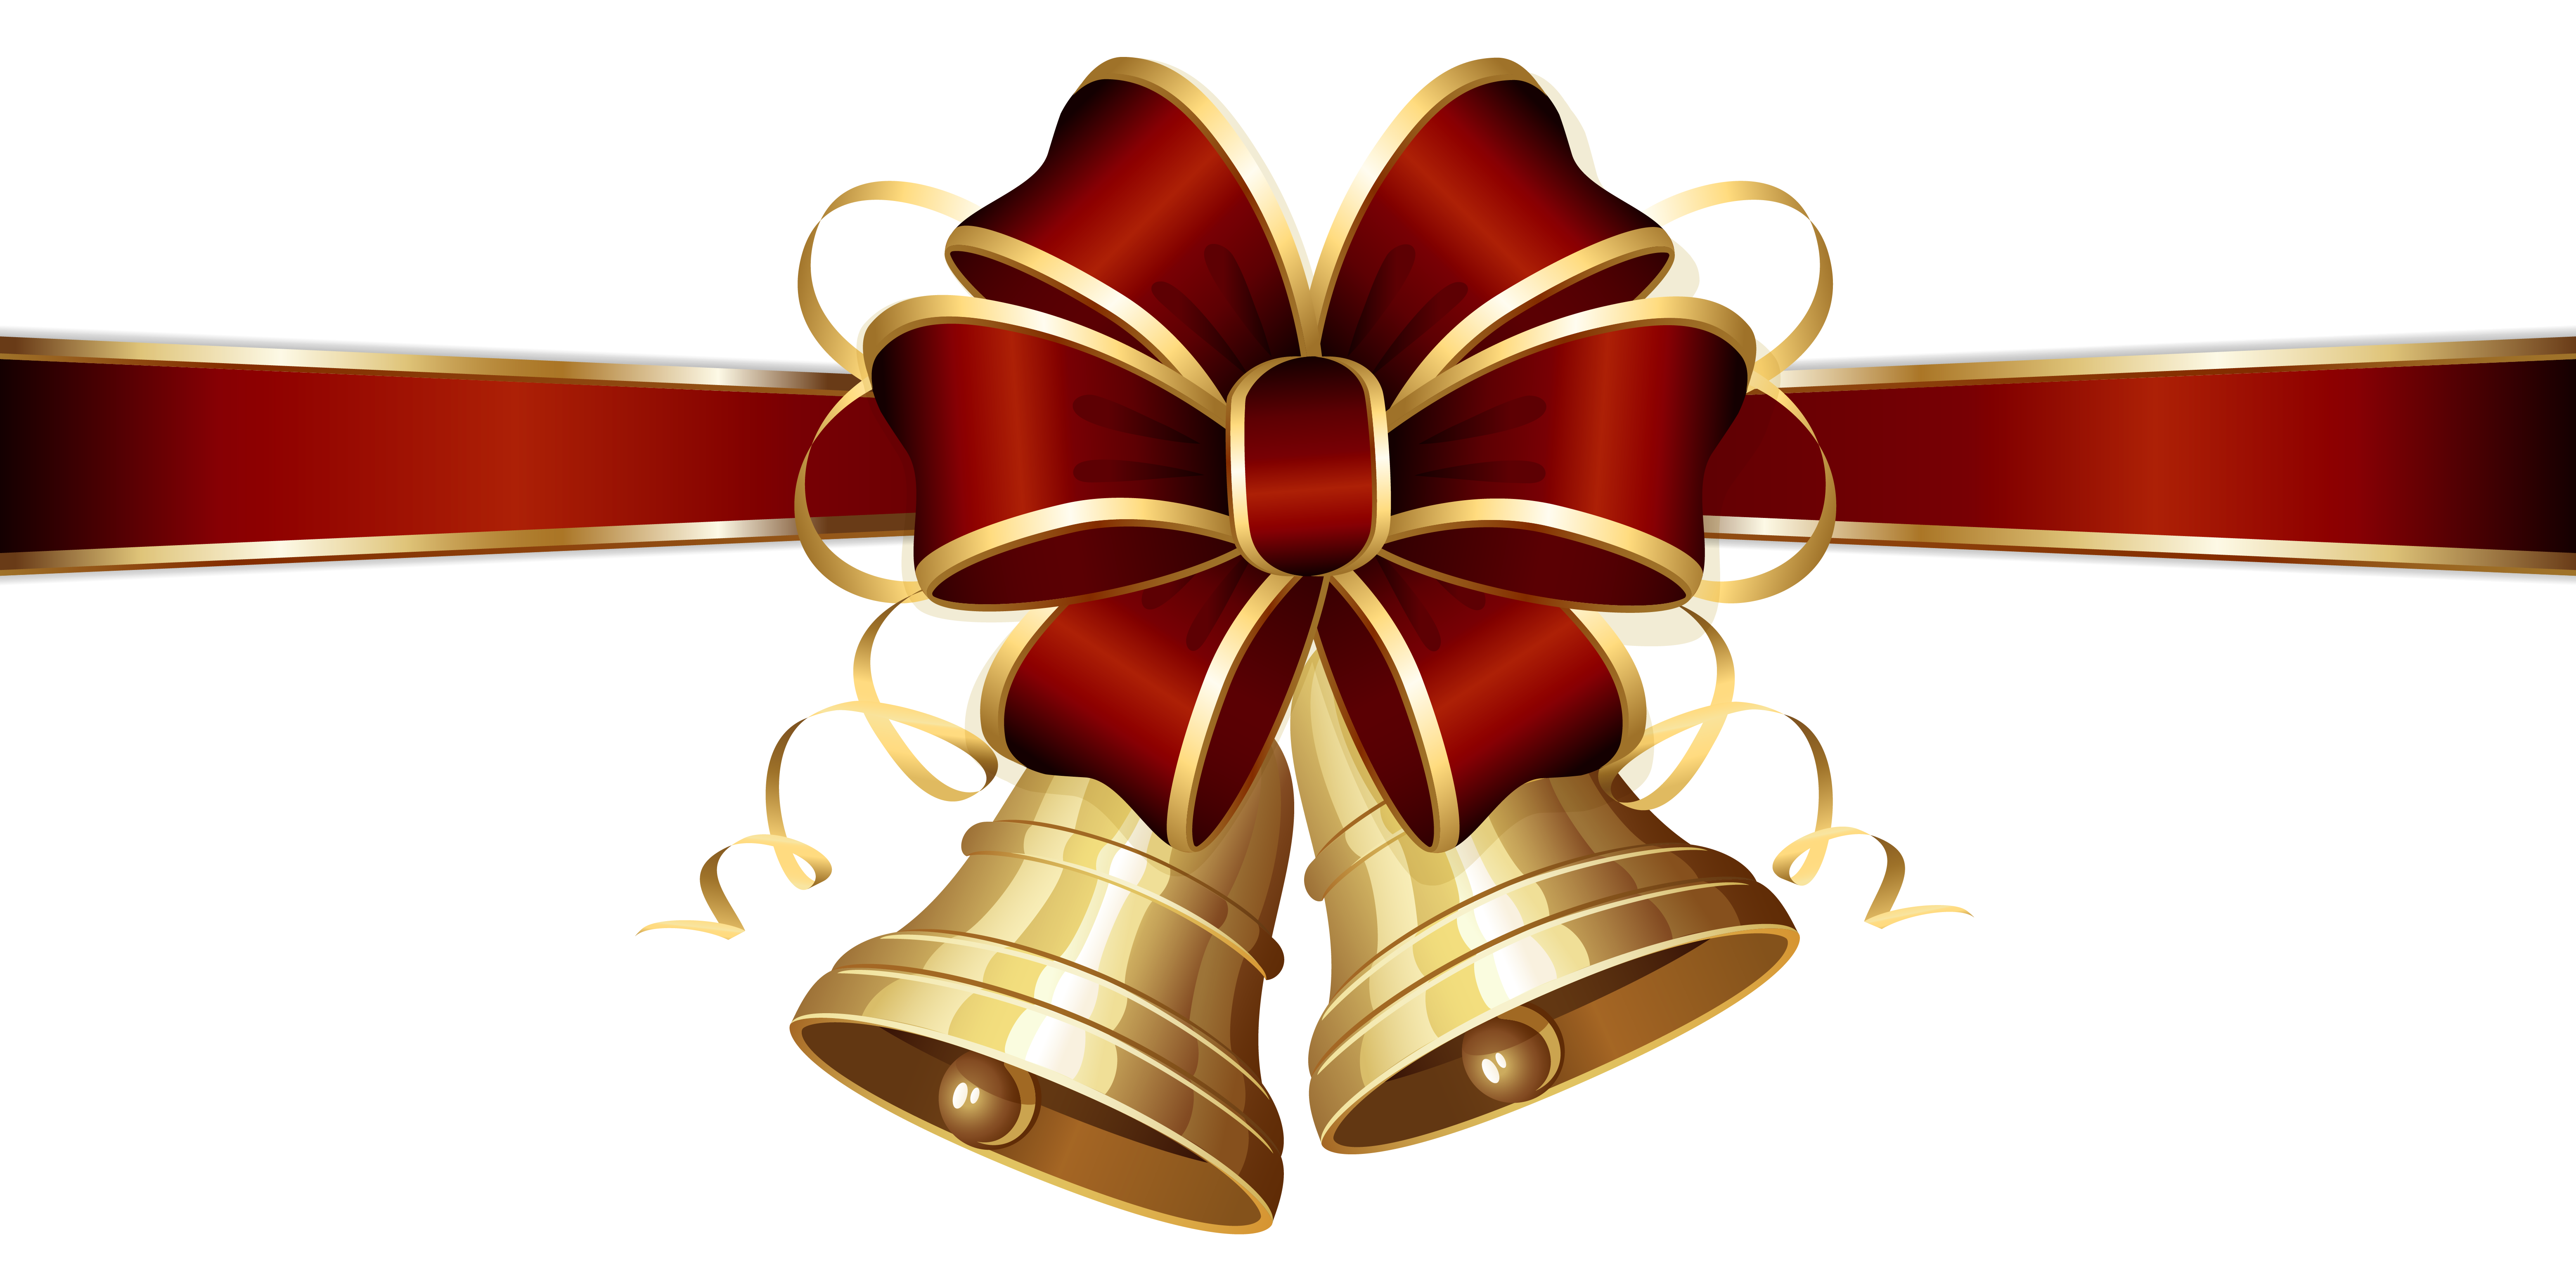 Christmas Jingle bell Clip art - Christmas Bells and Red Bow PNG ...